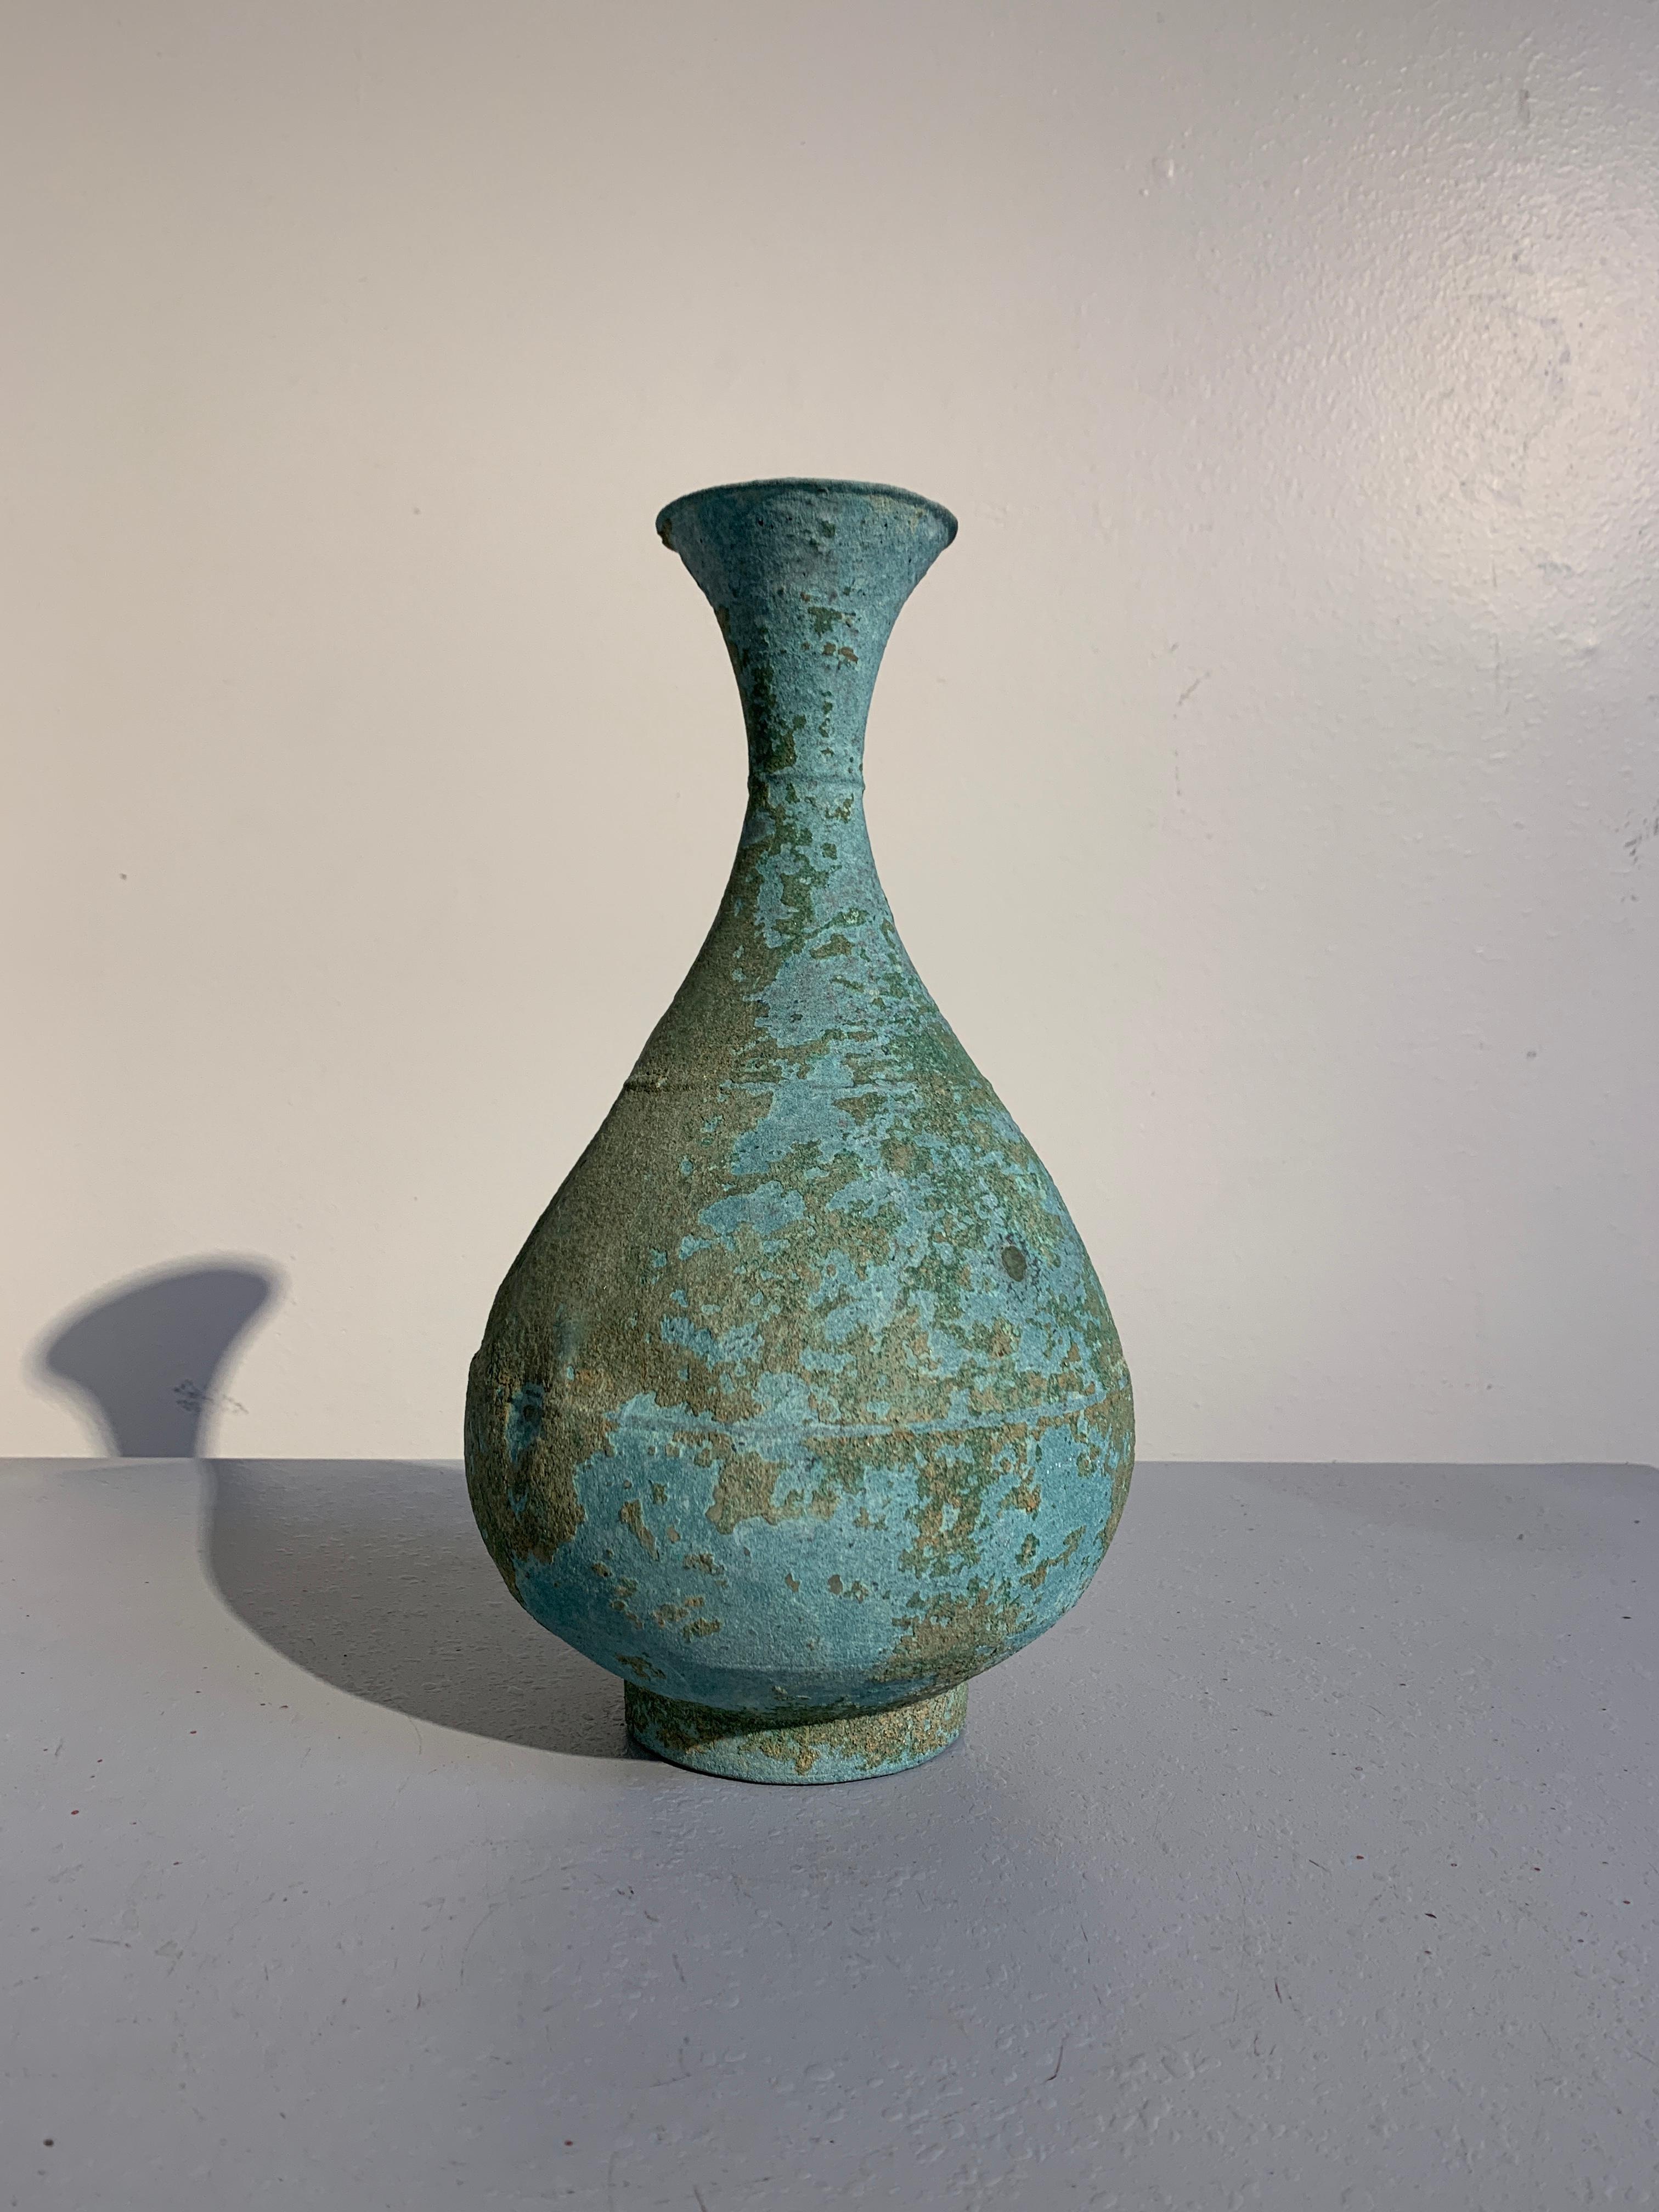 A stunningly patinated Korean ritual bronze bottle vase, Goryeo Dynasty, 12th-13th century, Korea.

The bronze bottle vase crafted from a thin bronze, with a pear shaped body, long tapering neck, and flaring mouth, all set upon a short ring foot.